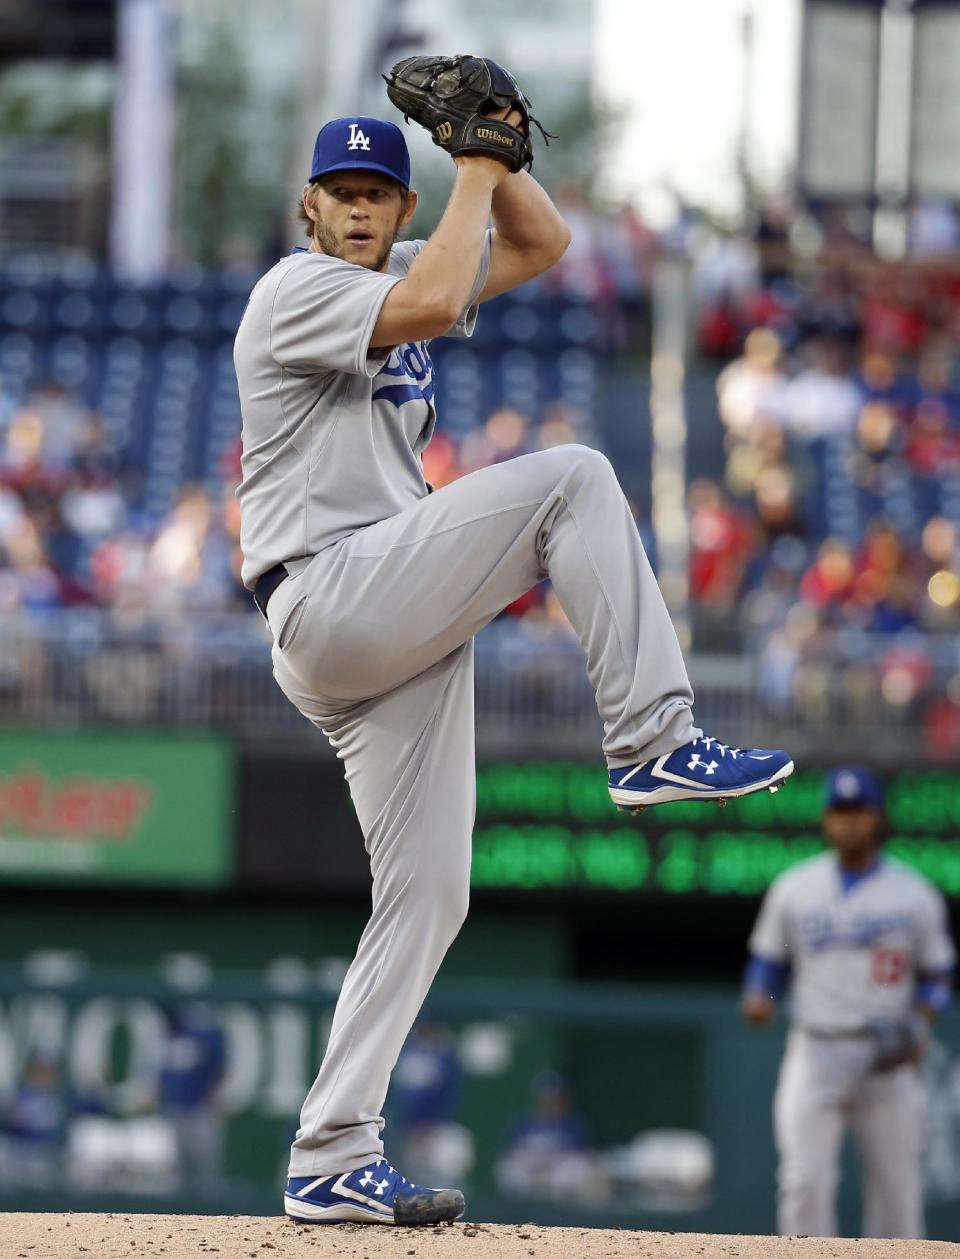 Los Angeles Dodgers starting pitcher Clayton Kershaw throws during the first inning of a baseball game against the Washington Nationals at Nationals Park, Tuesday, May 6, 2014, in Washington. (AP Photo/Alex Brandon)